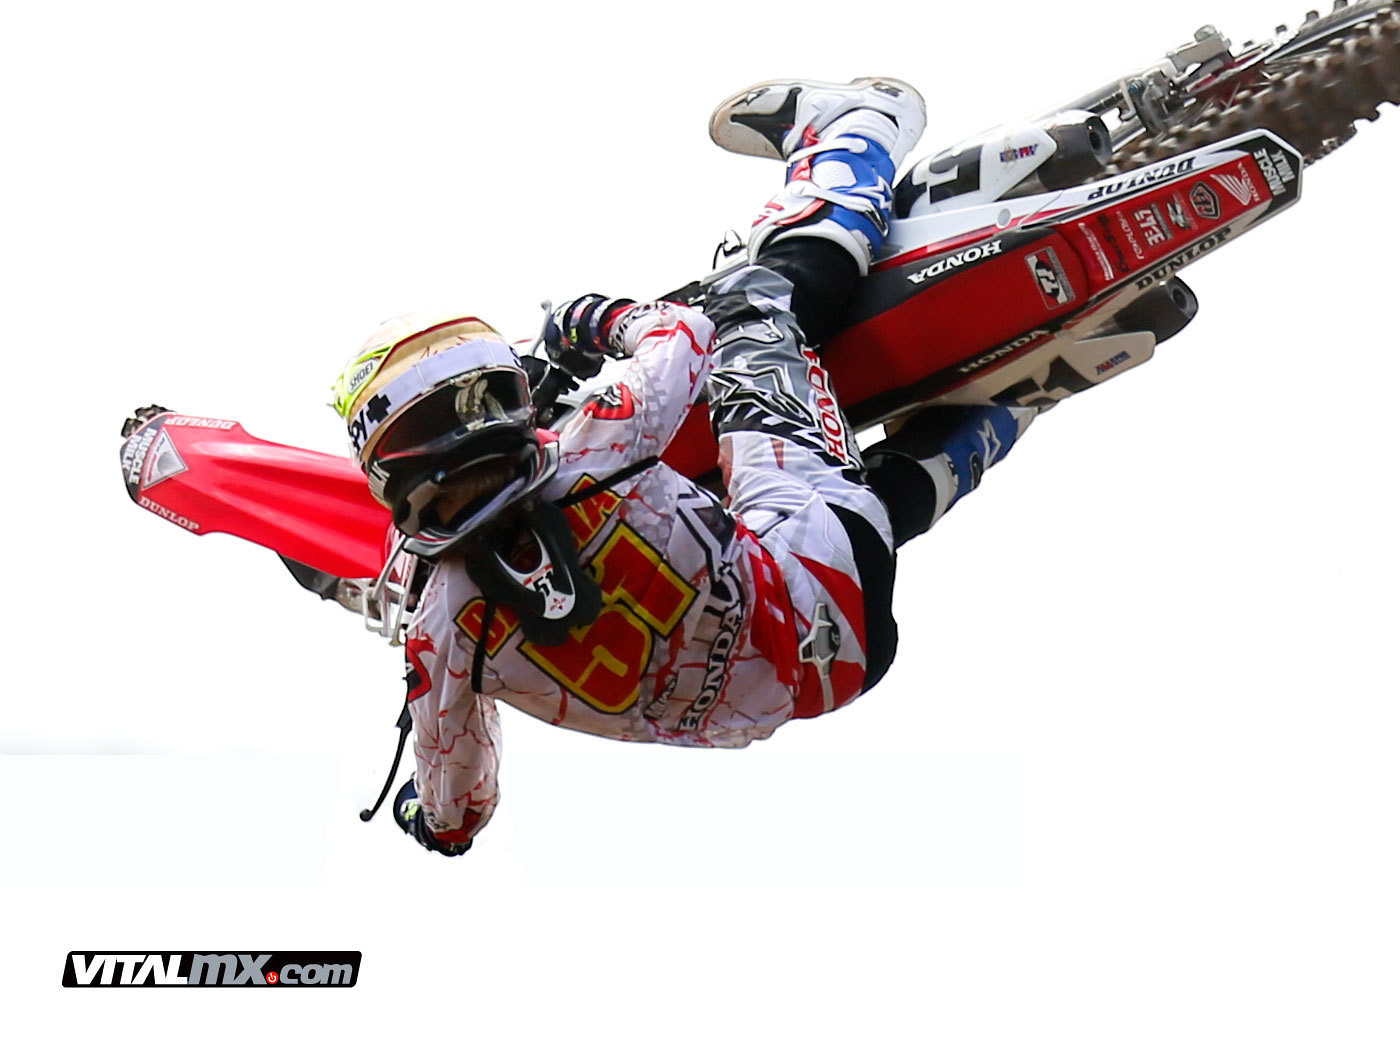 Barcia wallpaper anyone   Moto Related   Motocross Forums Message 1400x1050